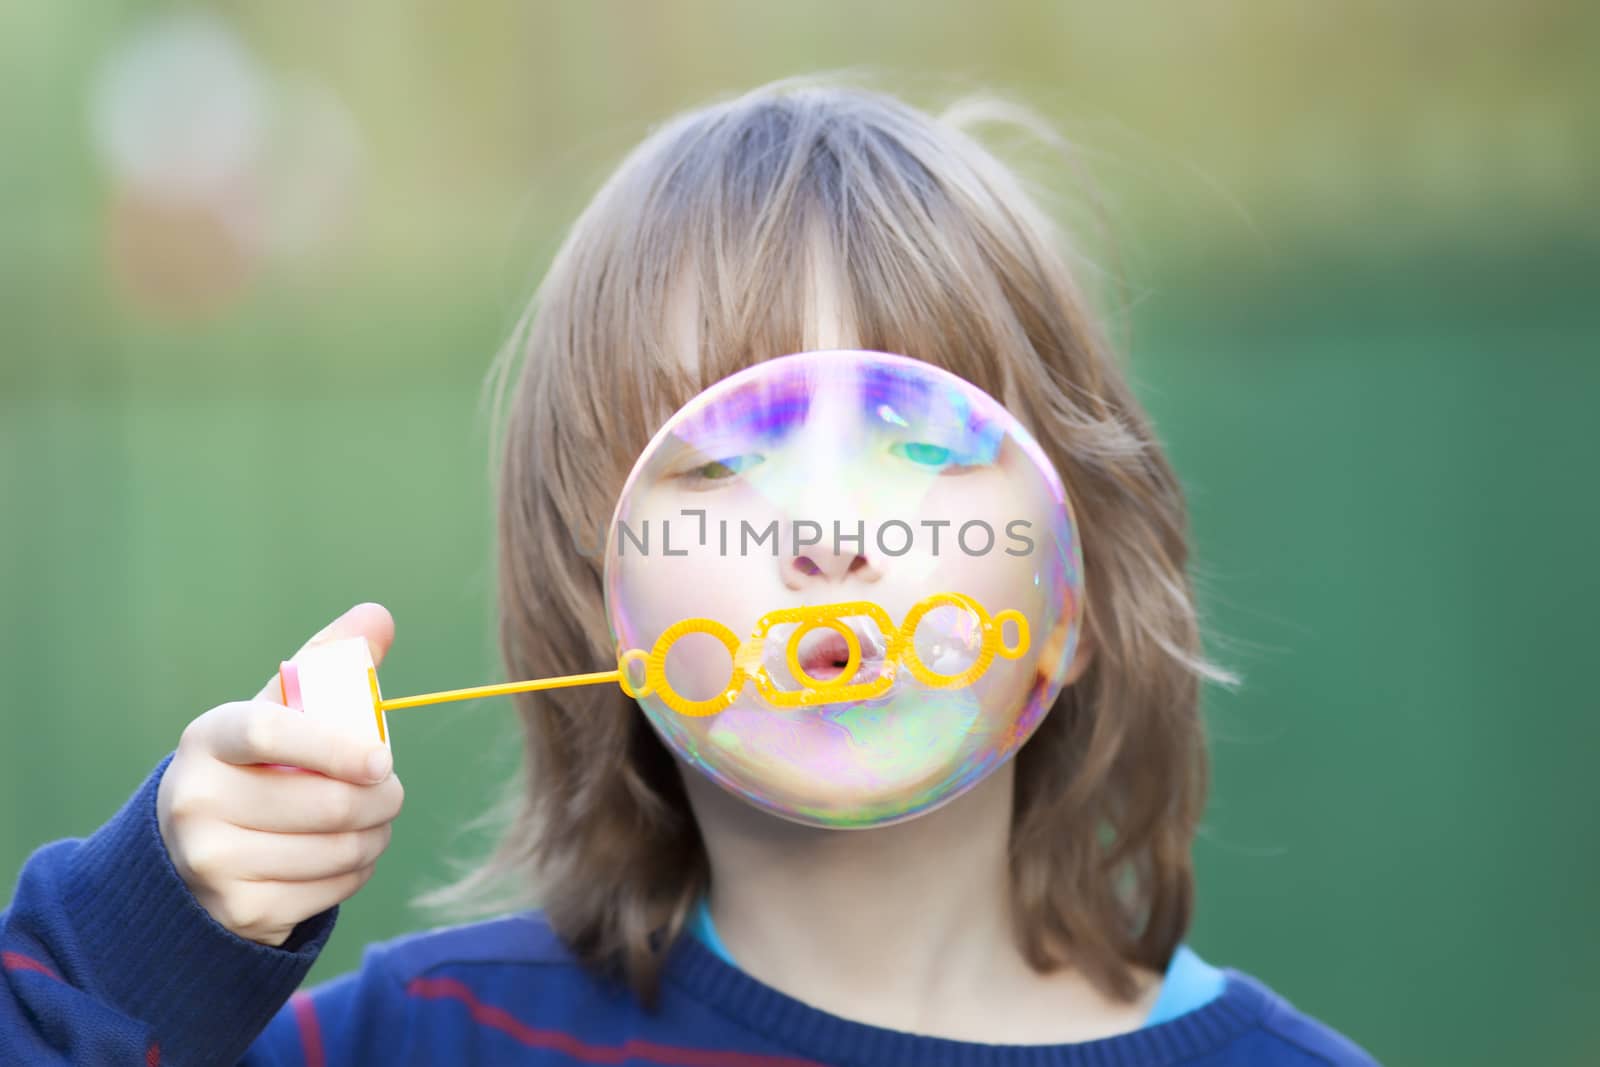 Boy with Blond Hair Blowing Bubbles Outdoor